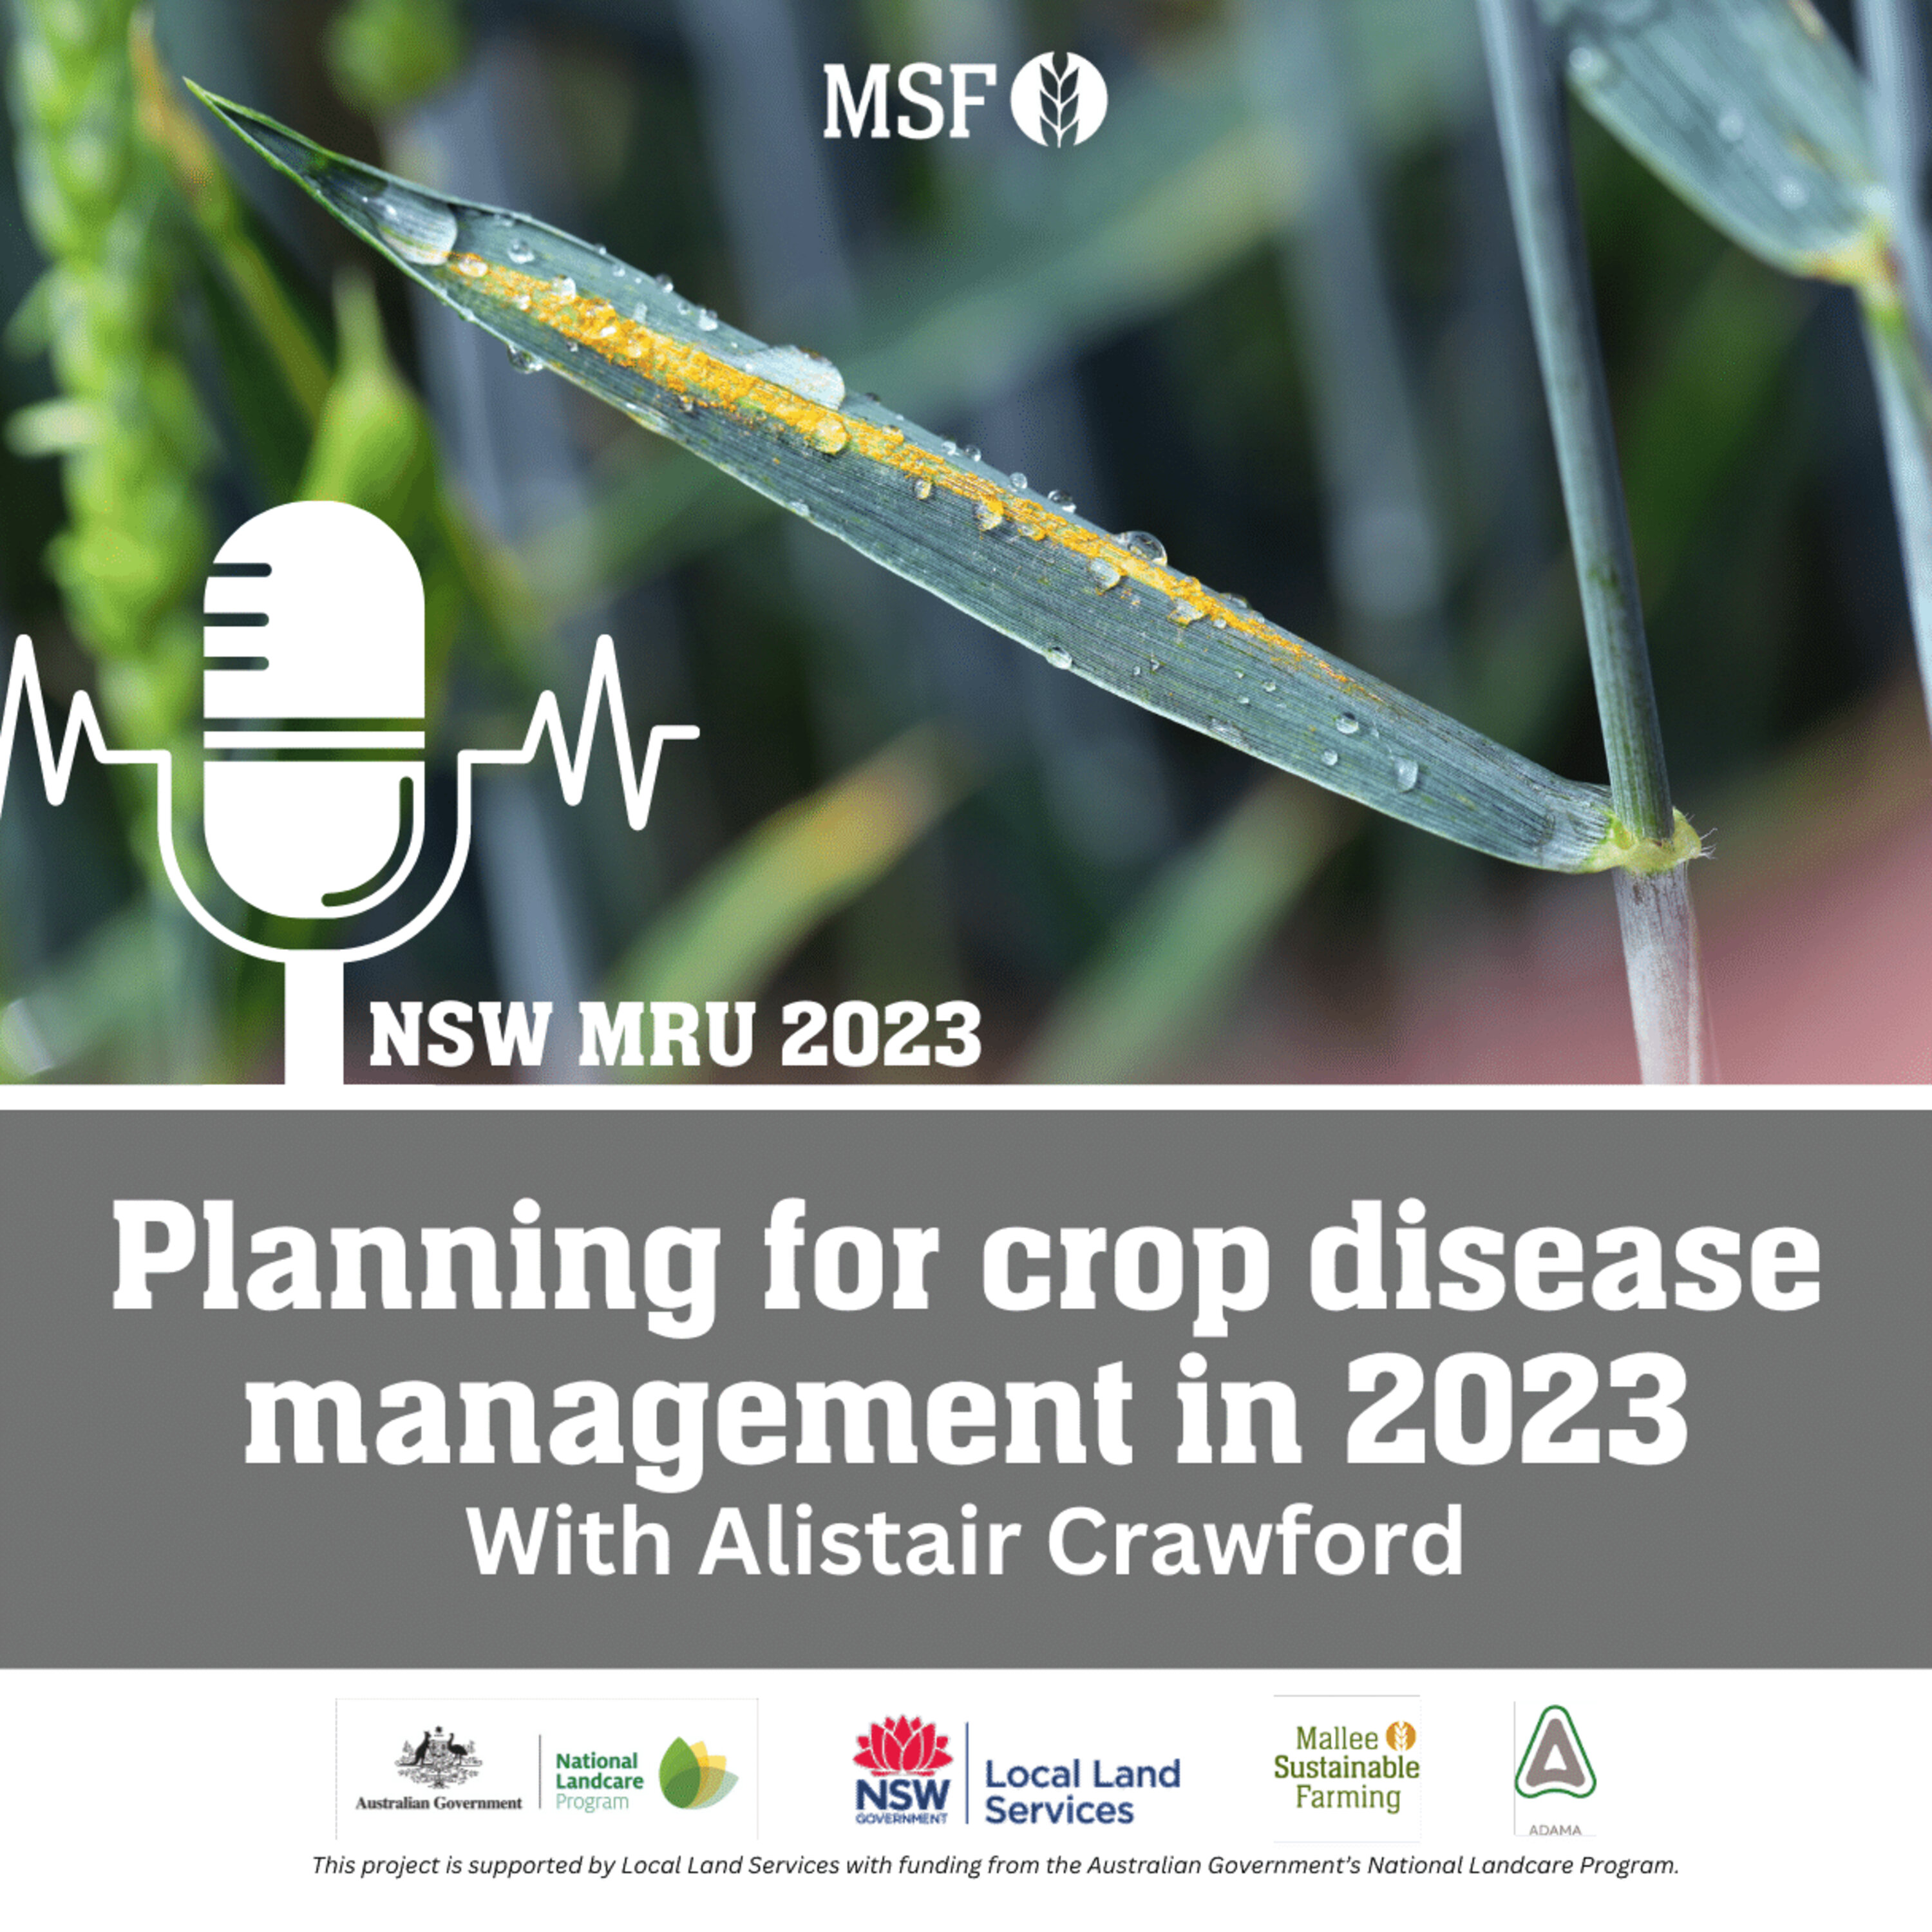 Leaf diseases to watch out for in ’23 with Alistair Crawford